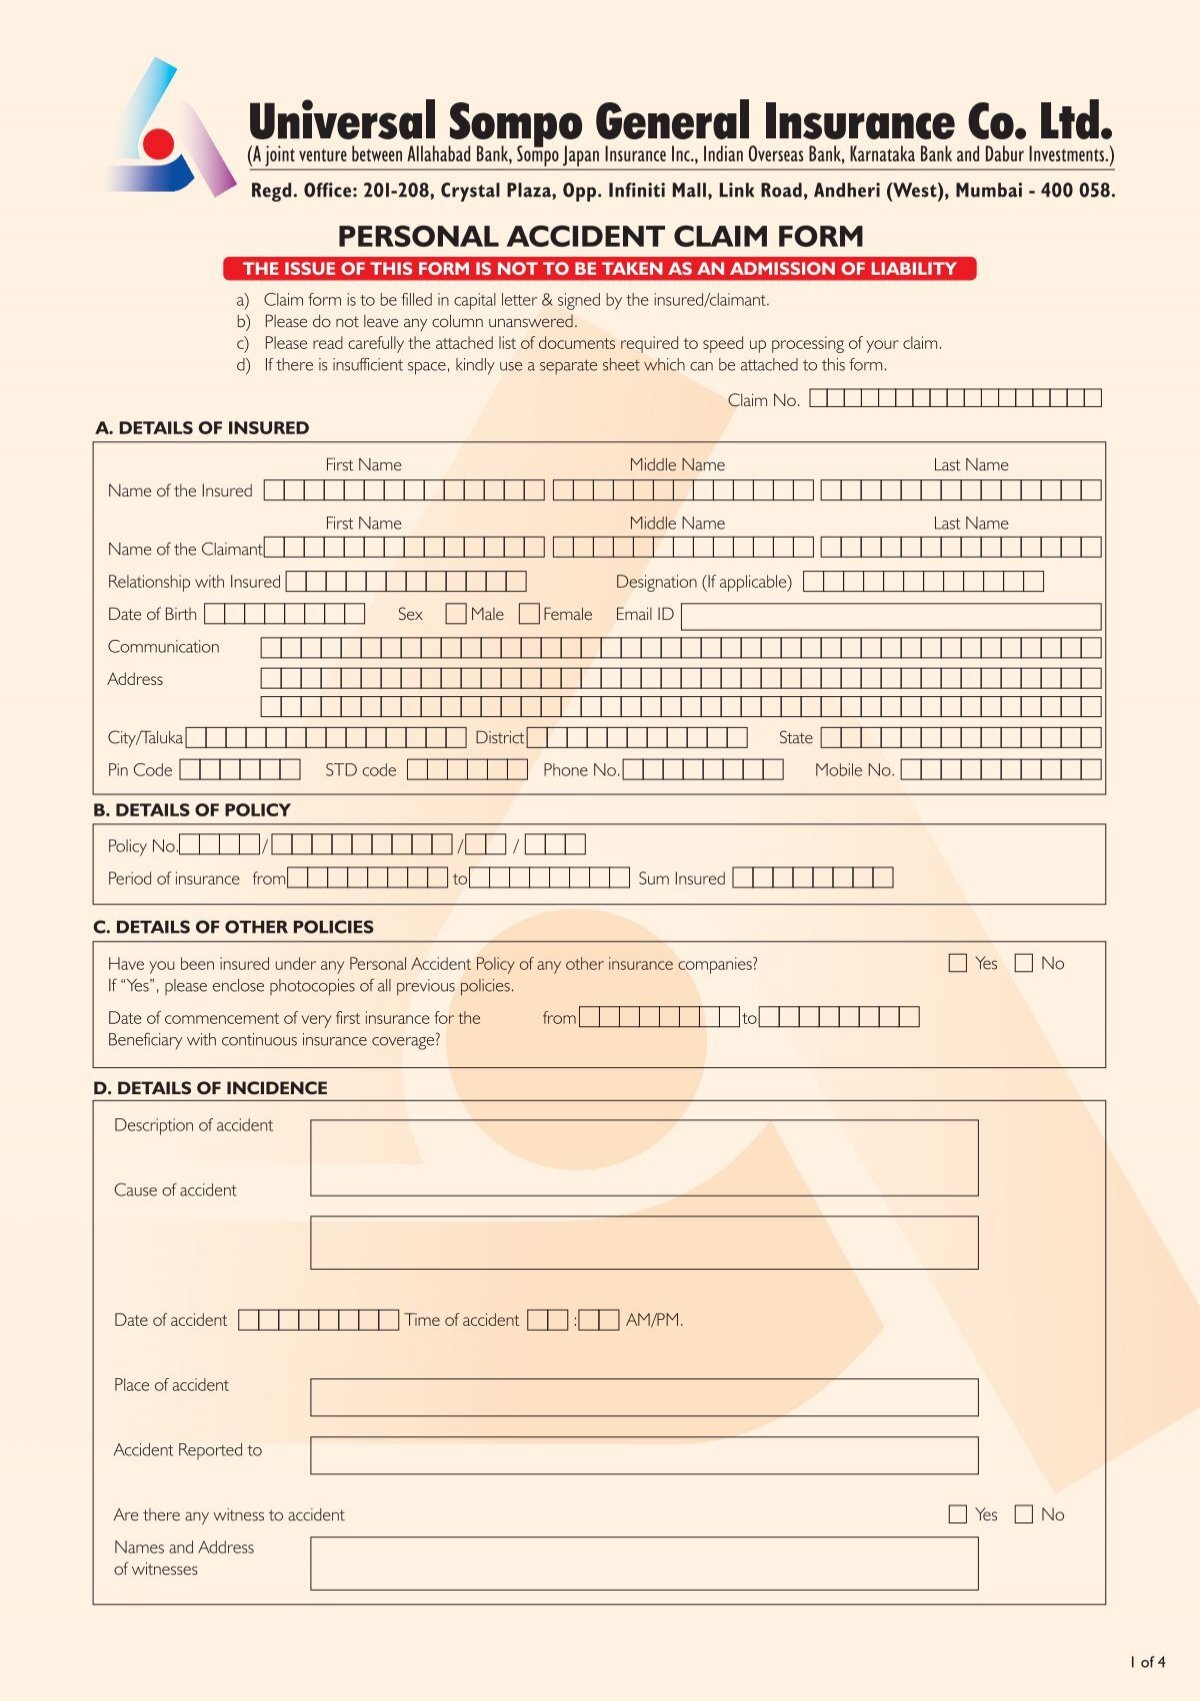 personal-accident-claim-form-universal-sompo